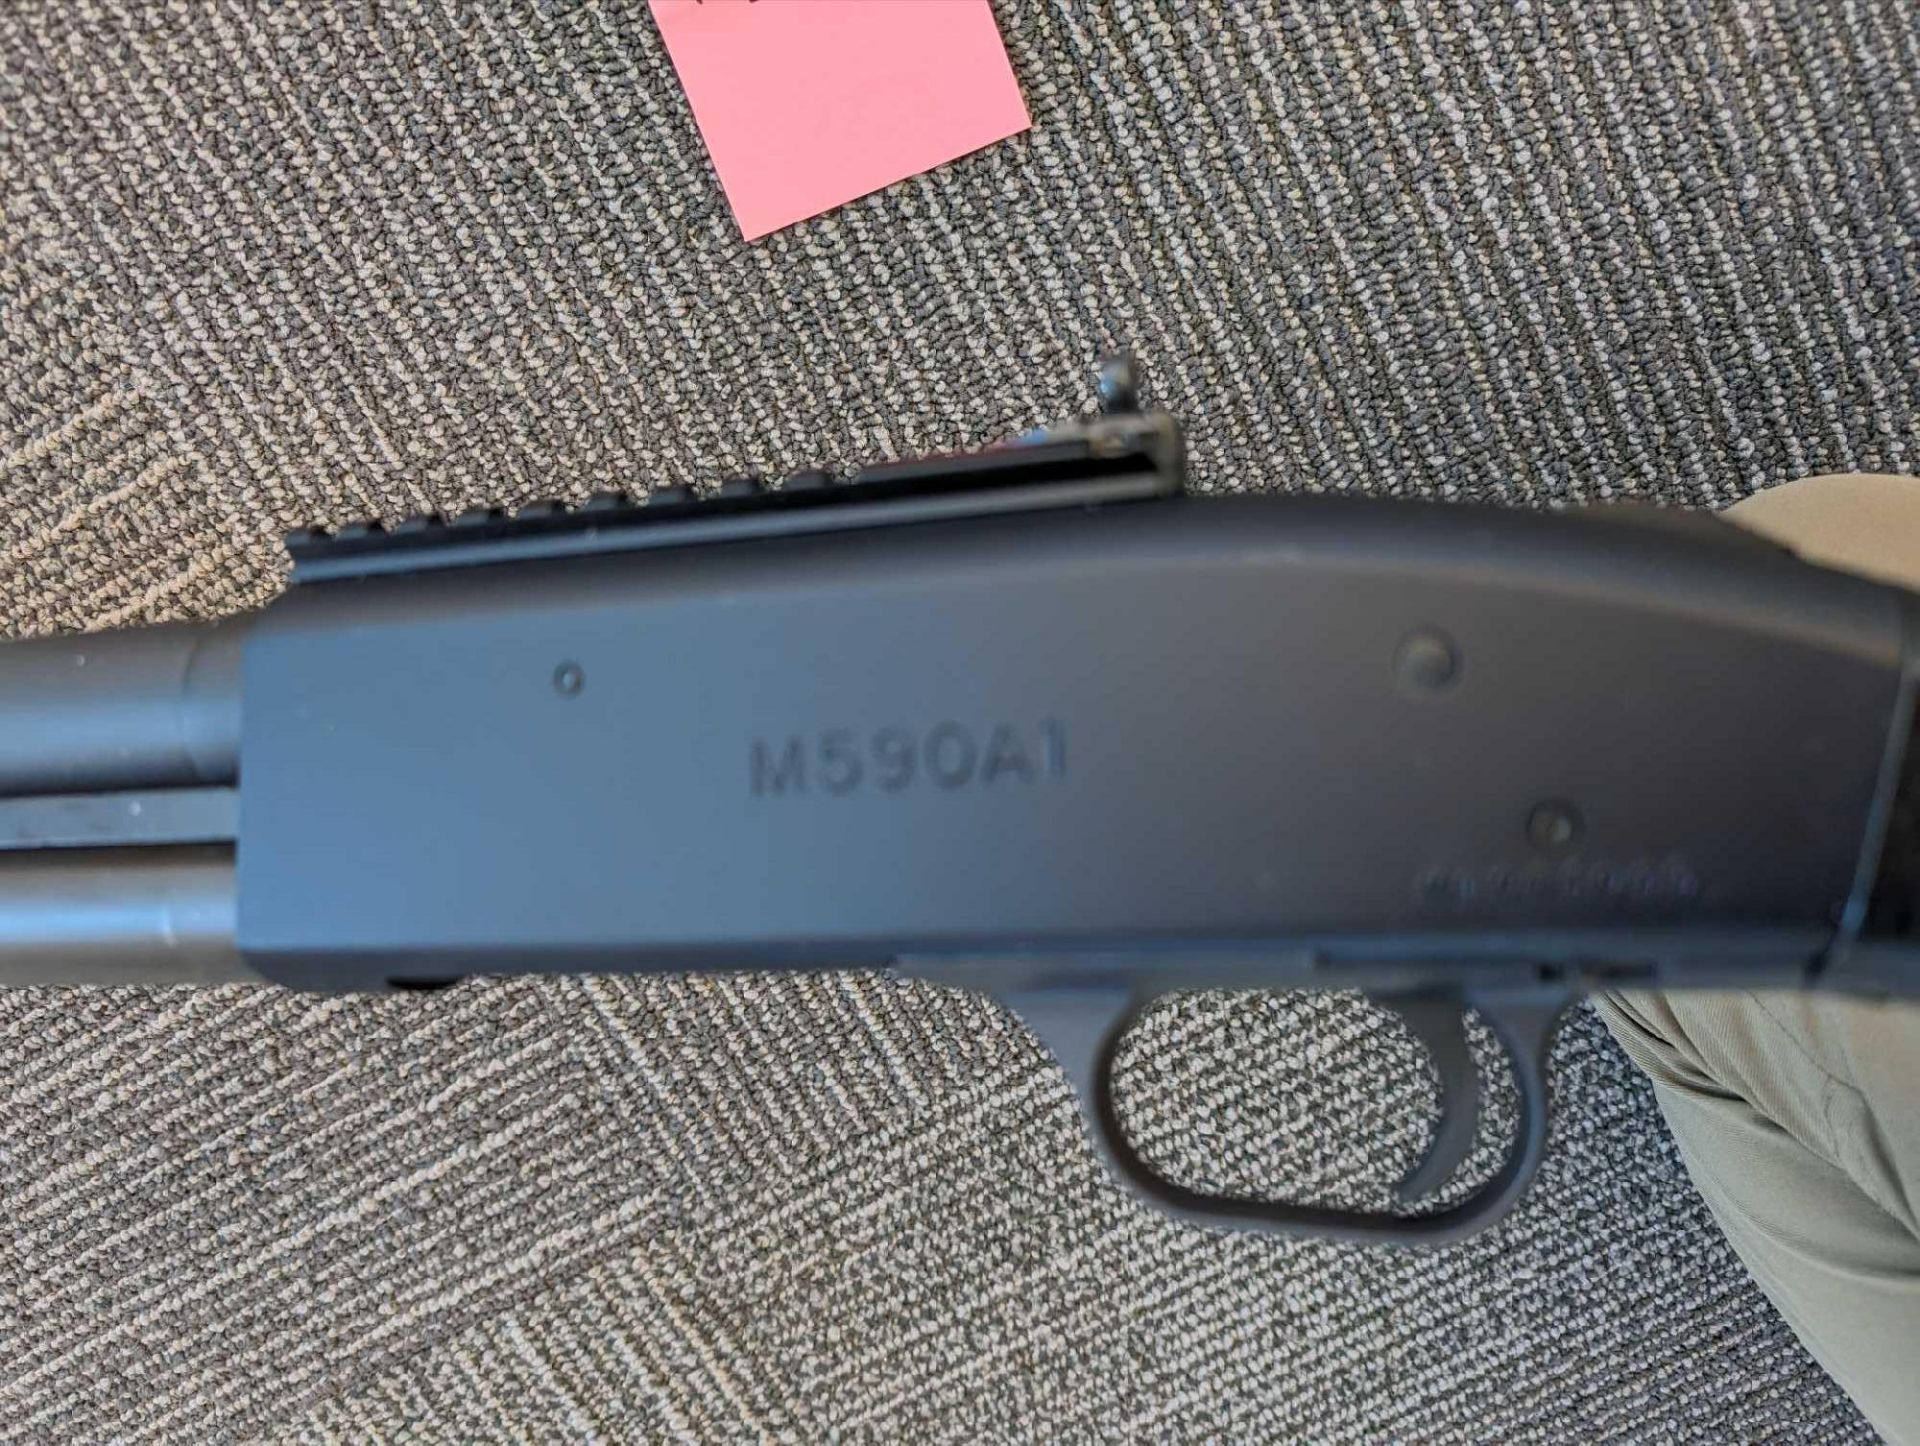 Mossberg model 590 12ga #V0975955   This will only be sold to residents of Utah - Image 9 of 9